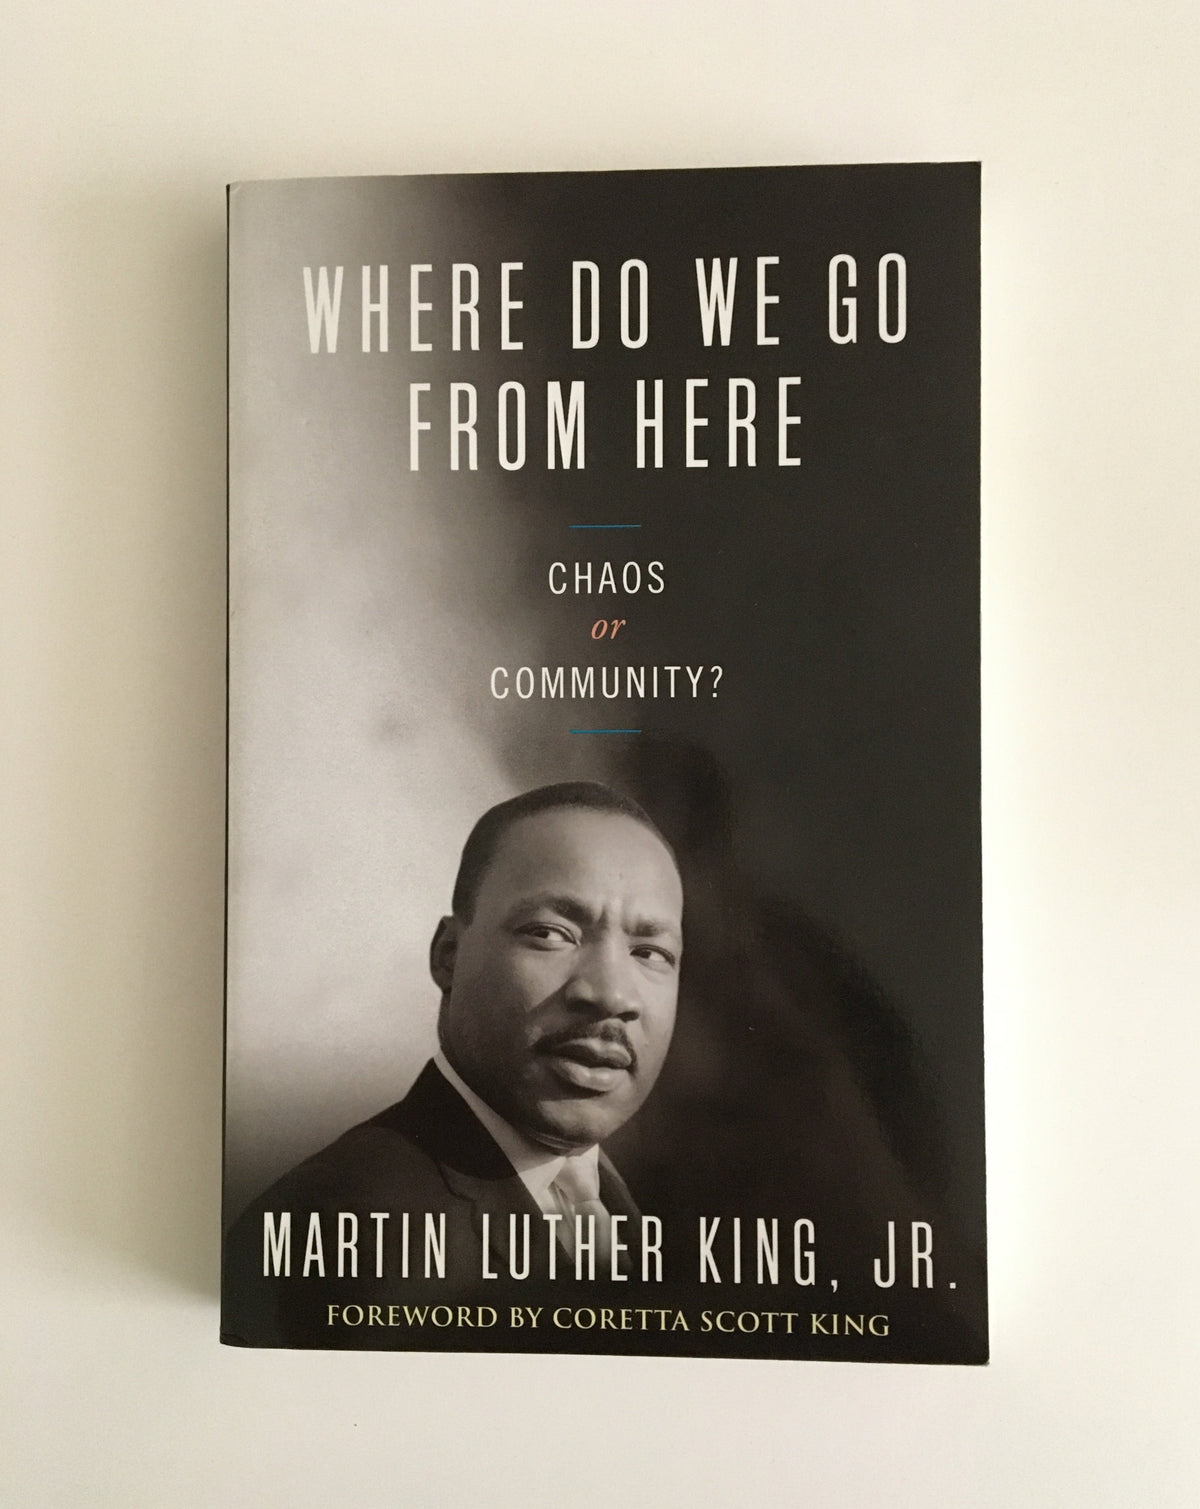 Where Do We Go From Here? by Martin Luther King Jr.